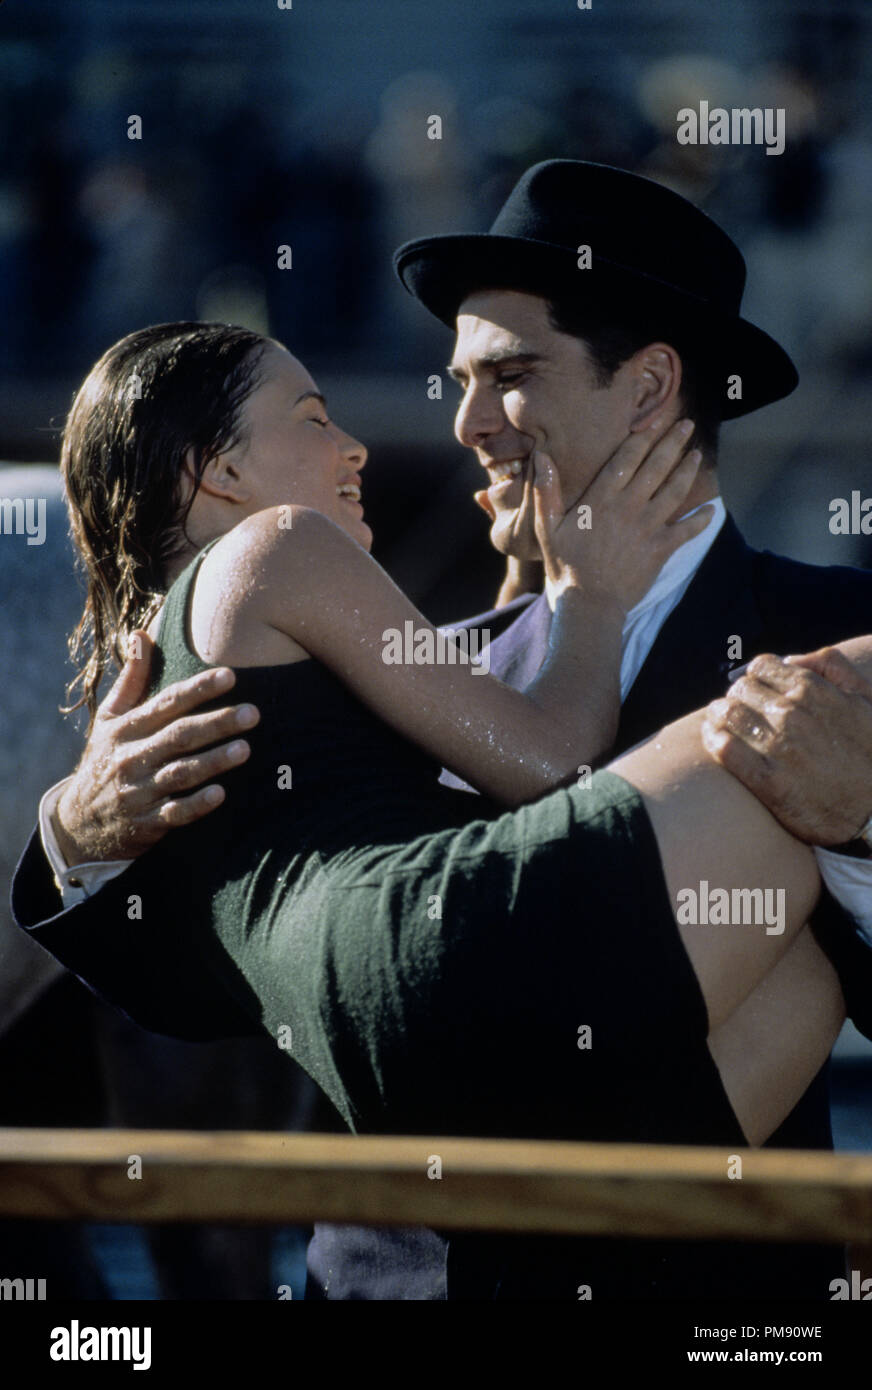 Film still or Publicity still from 'Wild Hearts Can't Be Broken' Gabrielle Anwar, Michael Schoeffling © 1991 Walt Disney Pictures  Photo Credit: Jim Bridges  All Rights Reserved   File Reference # 31527001THA  For Editorial Use Only Stock Photo